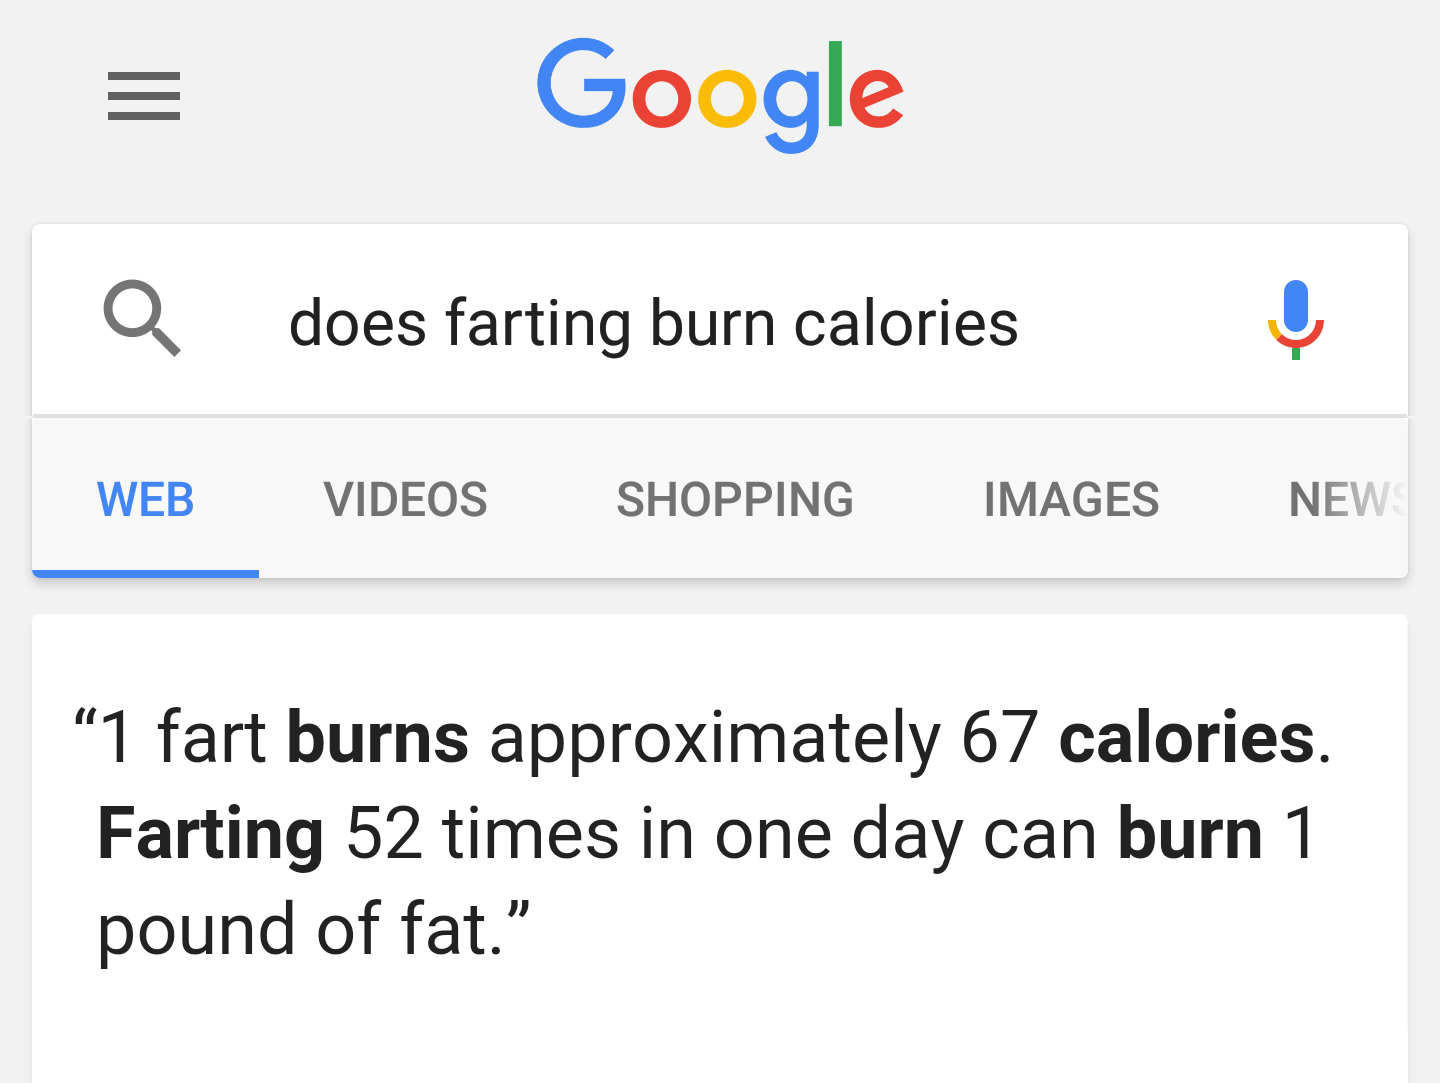 farting burns calories - Google a does farting burn calories Web Videos Shopping Images News "1 fart burns approximately 67 calories. Farting 52 times in one day can burn 1 pound of fat."